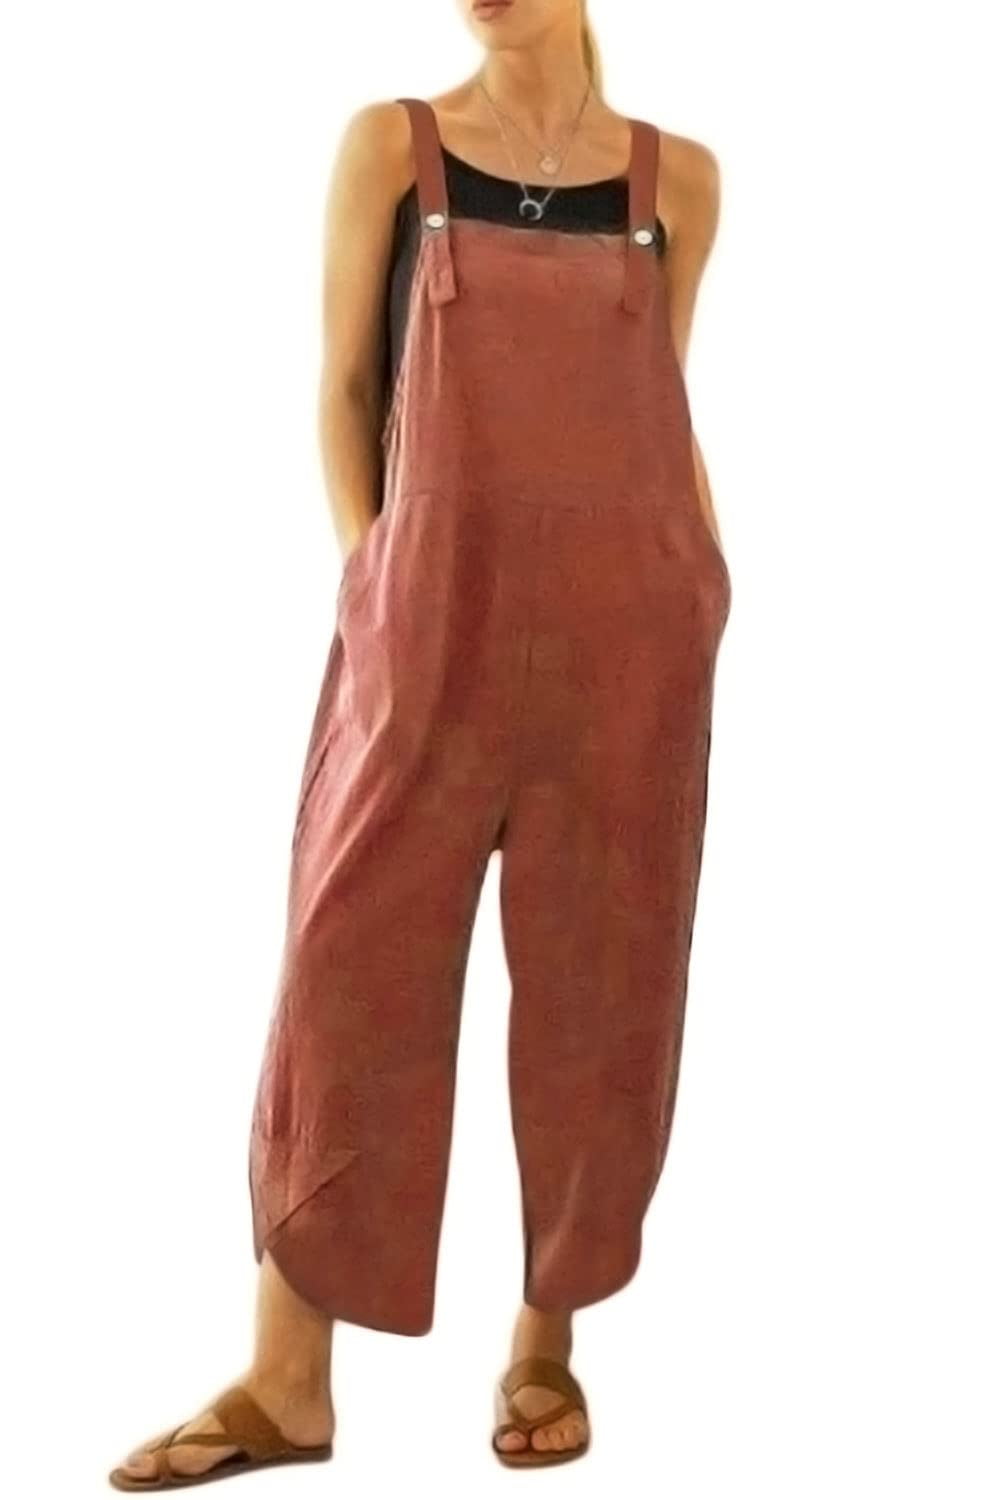 Loose Fit Dungarees Cotton Jumpsuits With Pockets for Women, Adjustable  Casual Overalls Comfy Bib Overalls Spring Clothing Gifts for Sister 